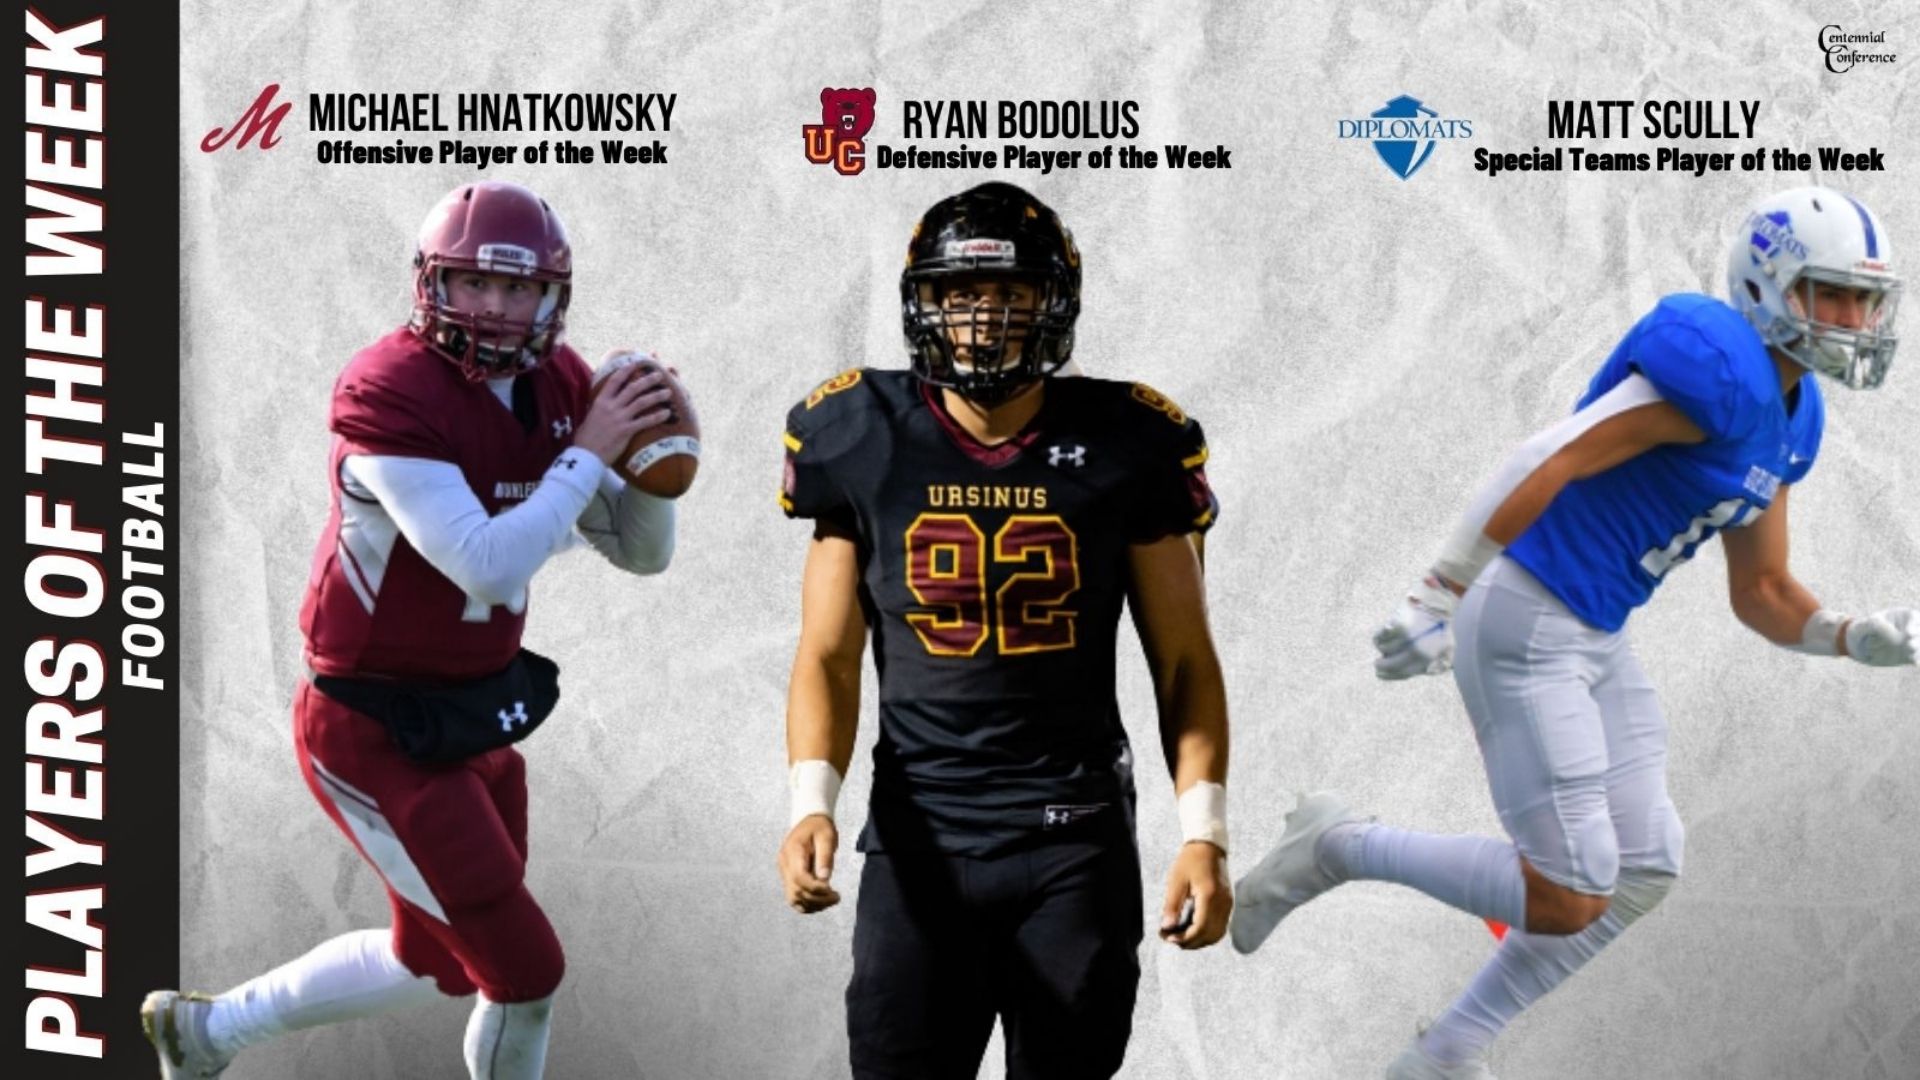 Hnatkowsky, Bodolus, & Scully, Players of the Week, 11/7/21